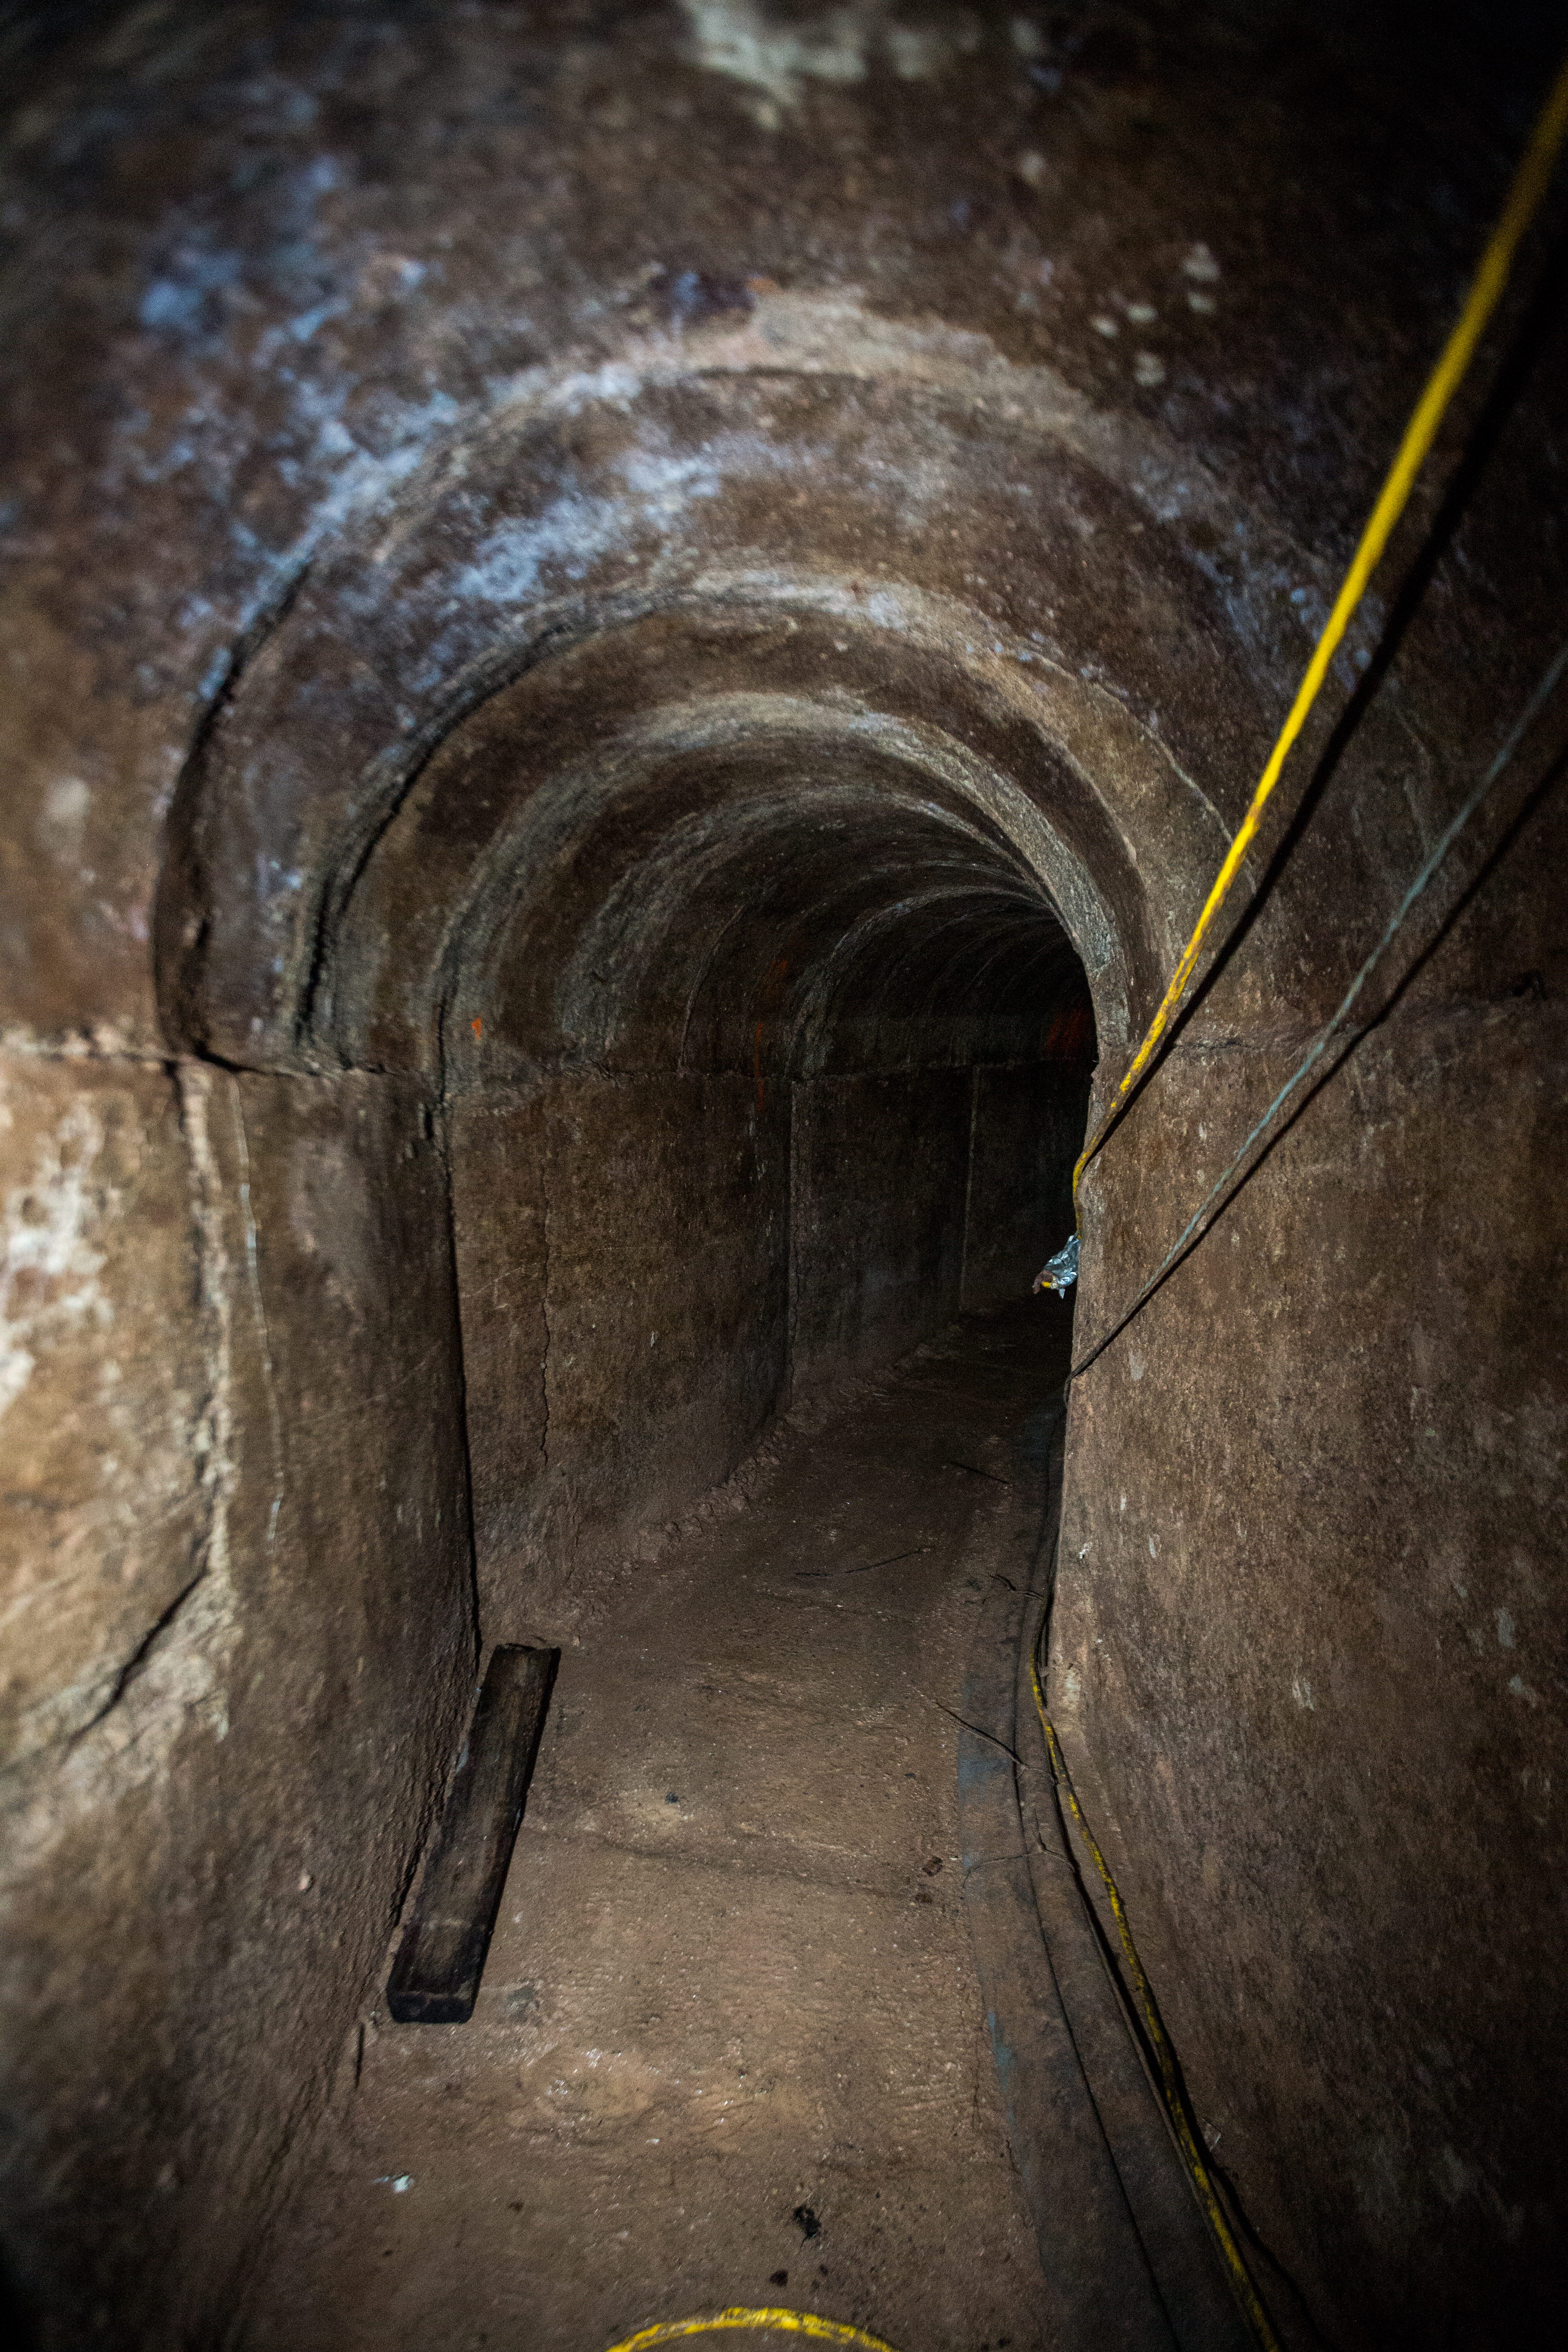 A view inside the sophisticated Douglas Tunnel, discovered in 1991.